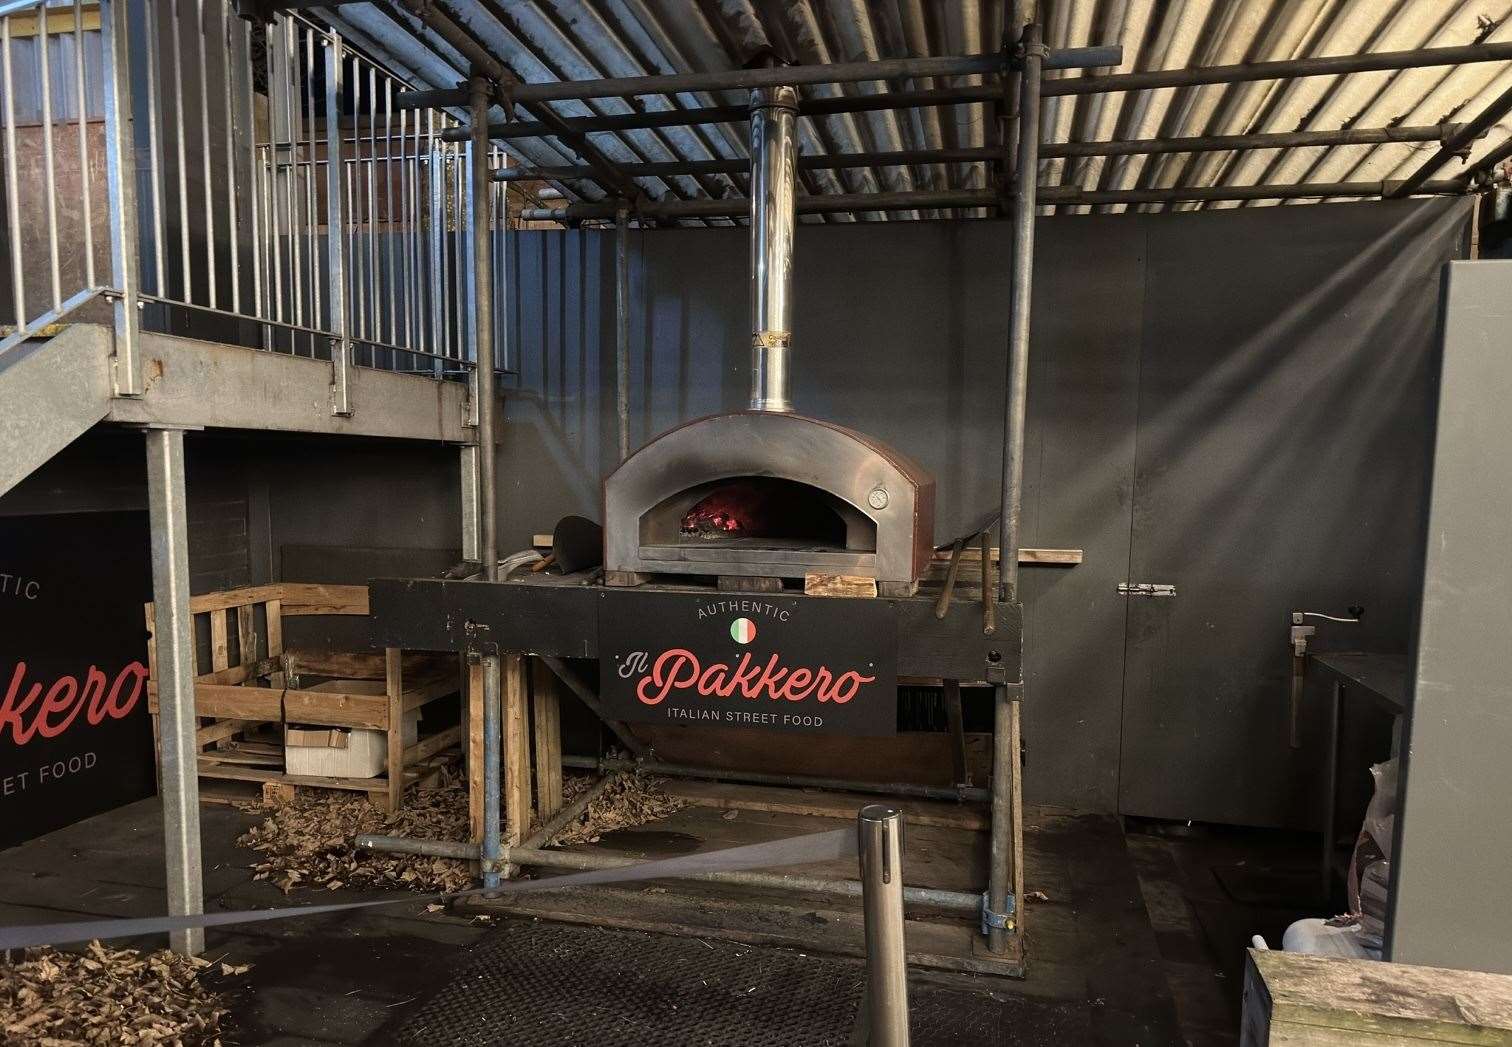 The pizzas were cooked in a woodfire